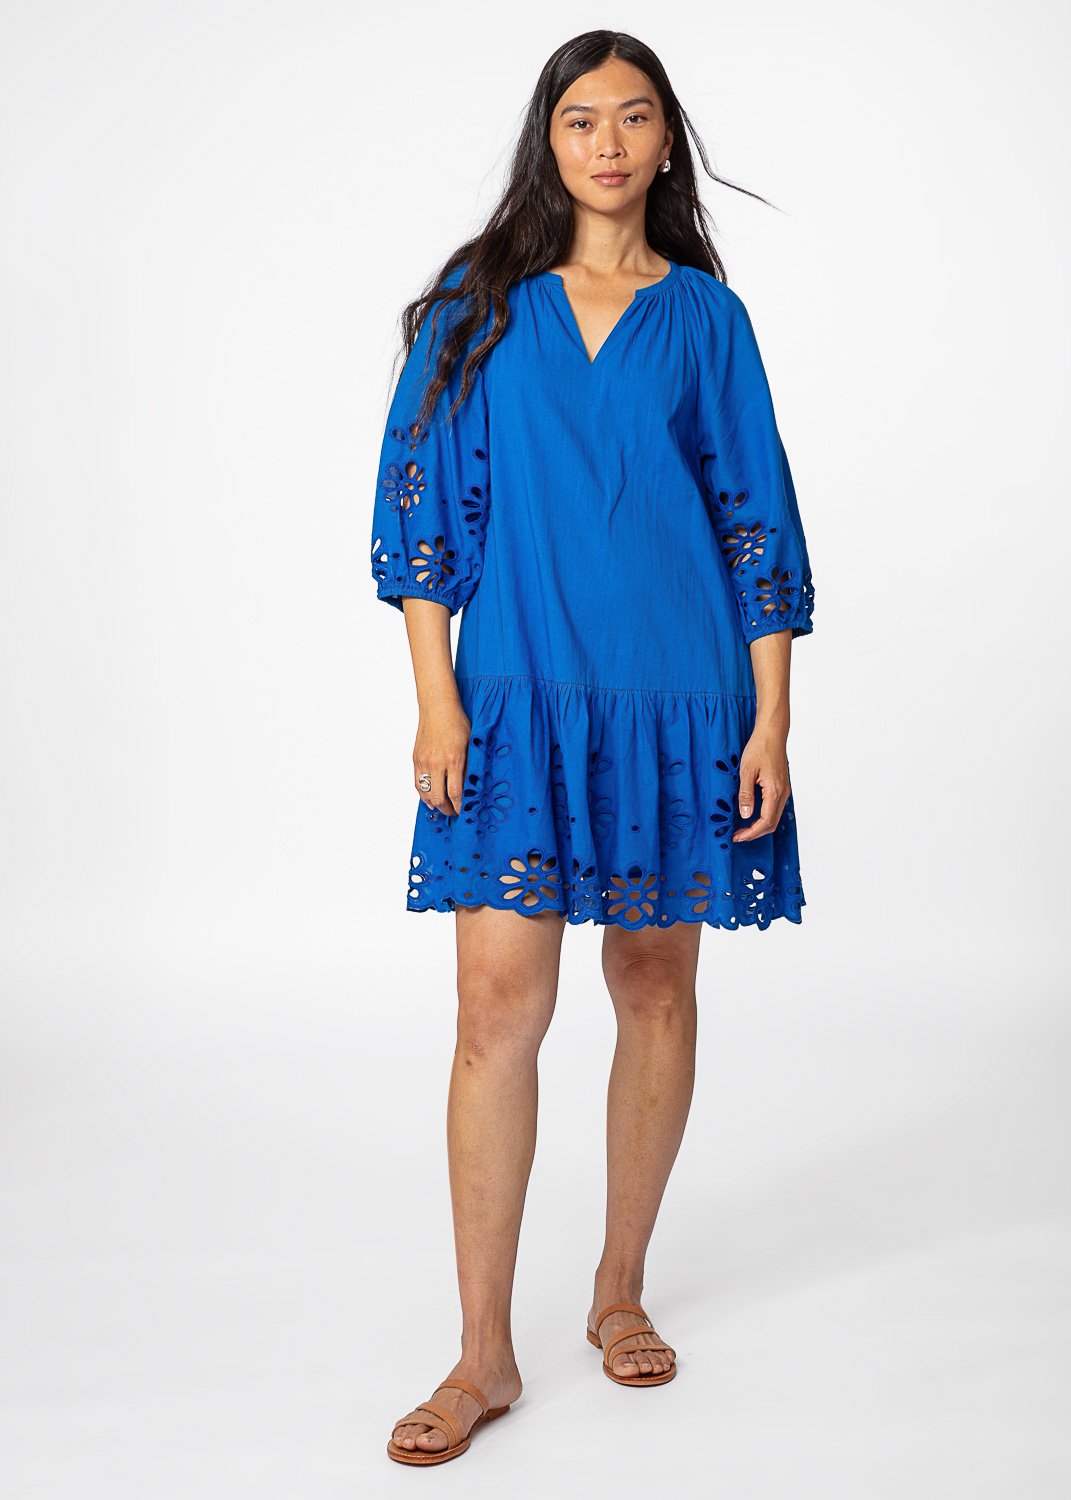 Blue broderie anglaise dress